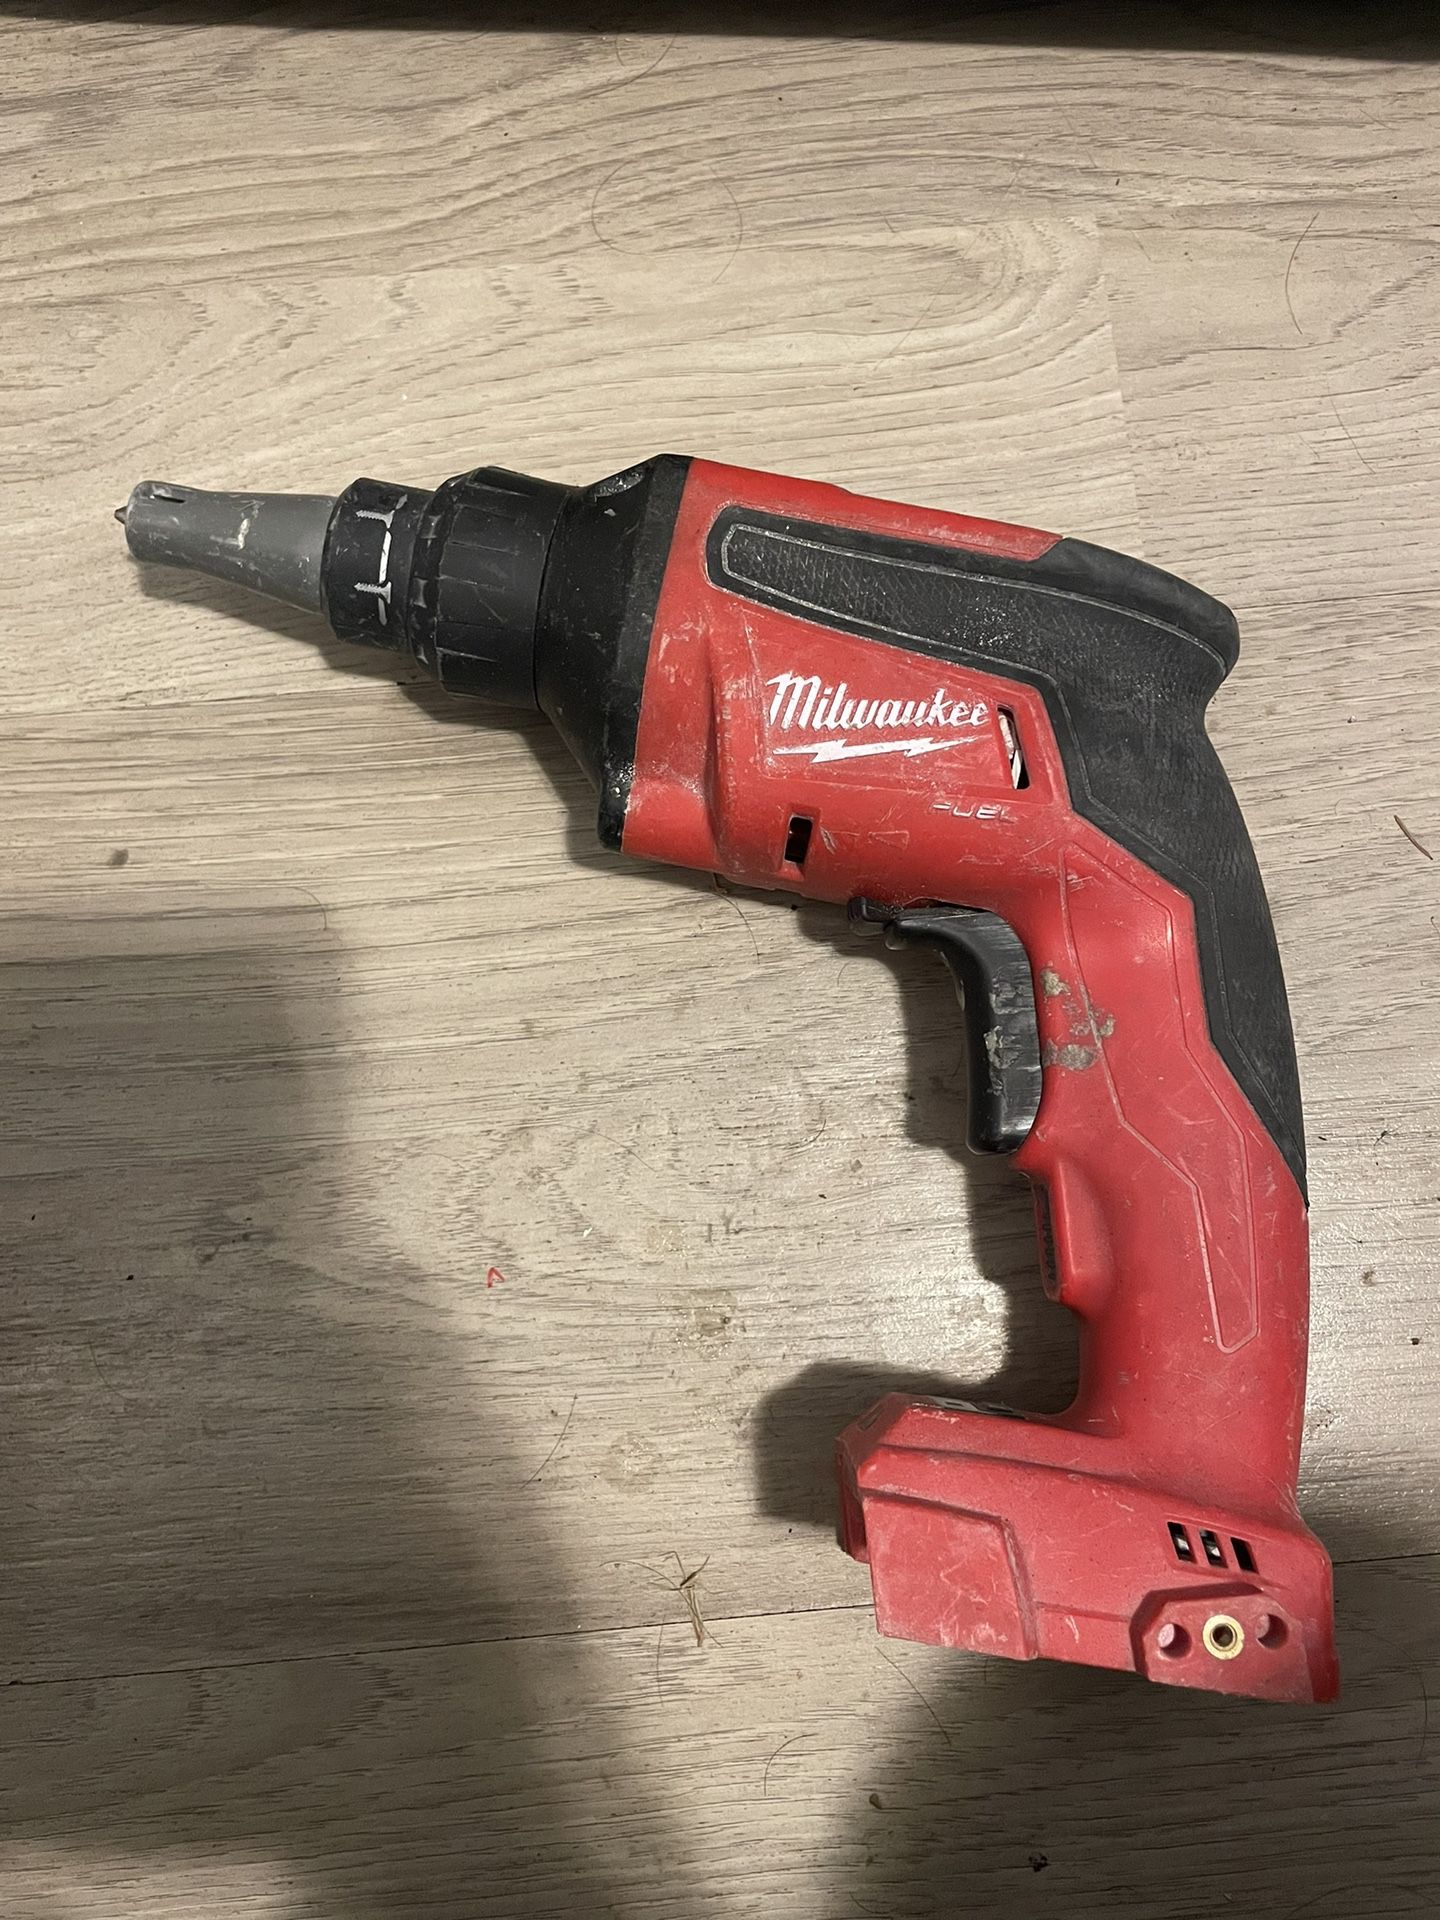 M18 FUEL 18V Lithium-Ion Brushless Cordless Drywall Screw Gun (Tool-Only)